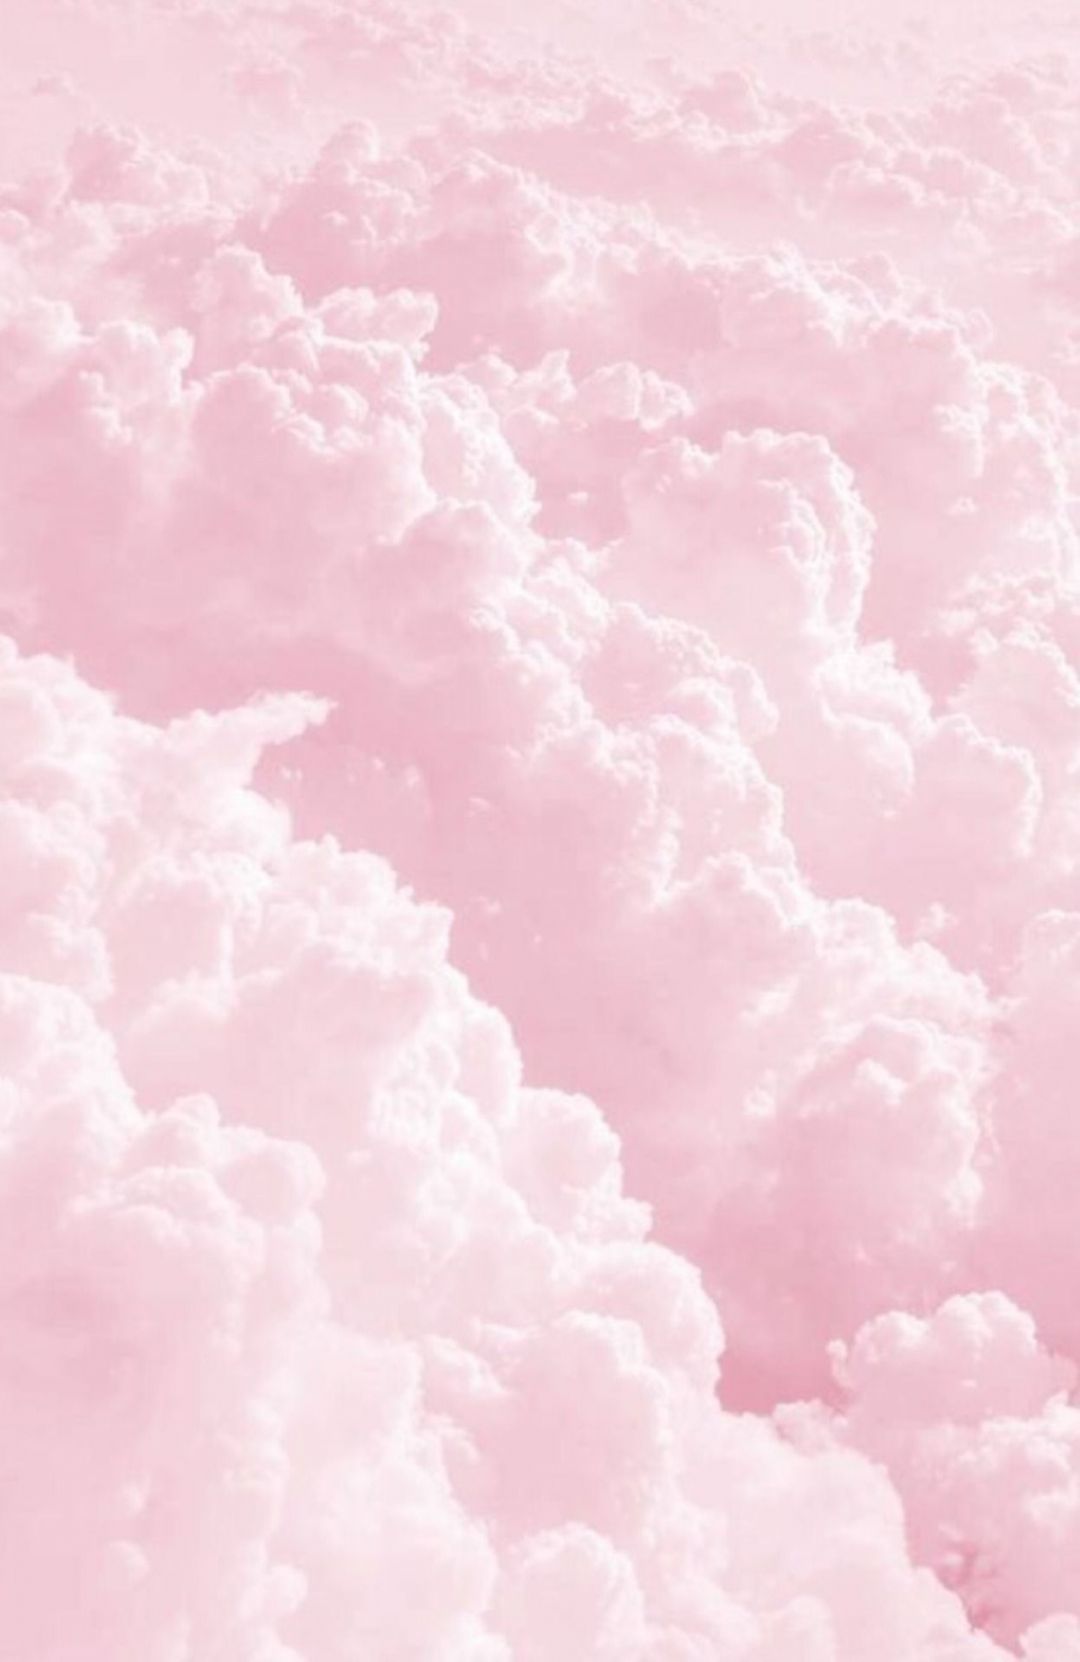 Pale Pink Aesthetic Wallpapers